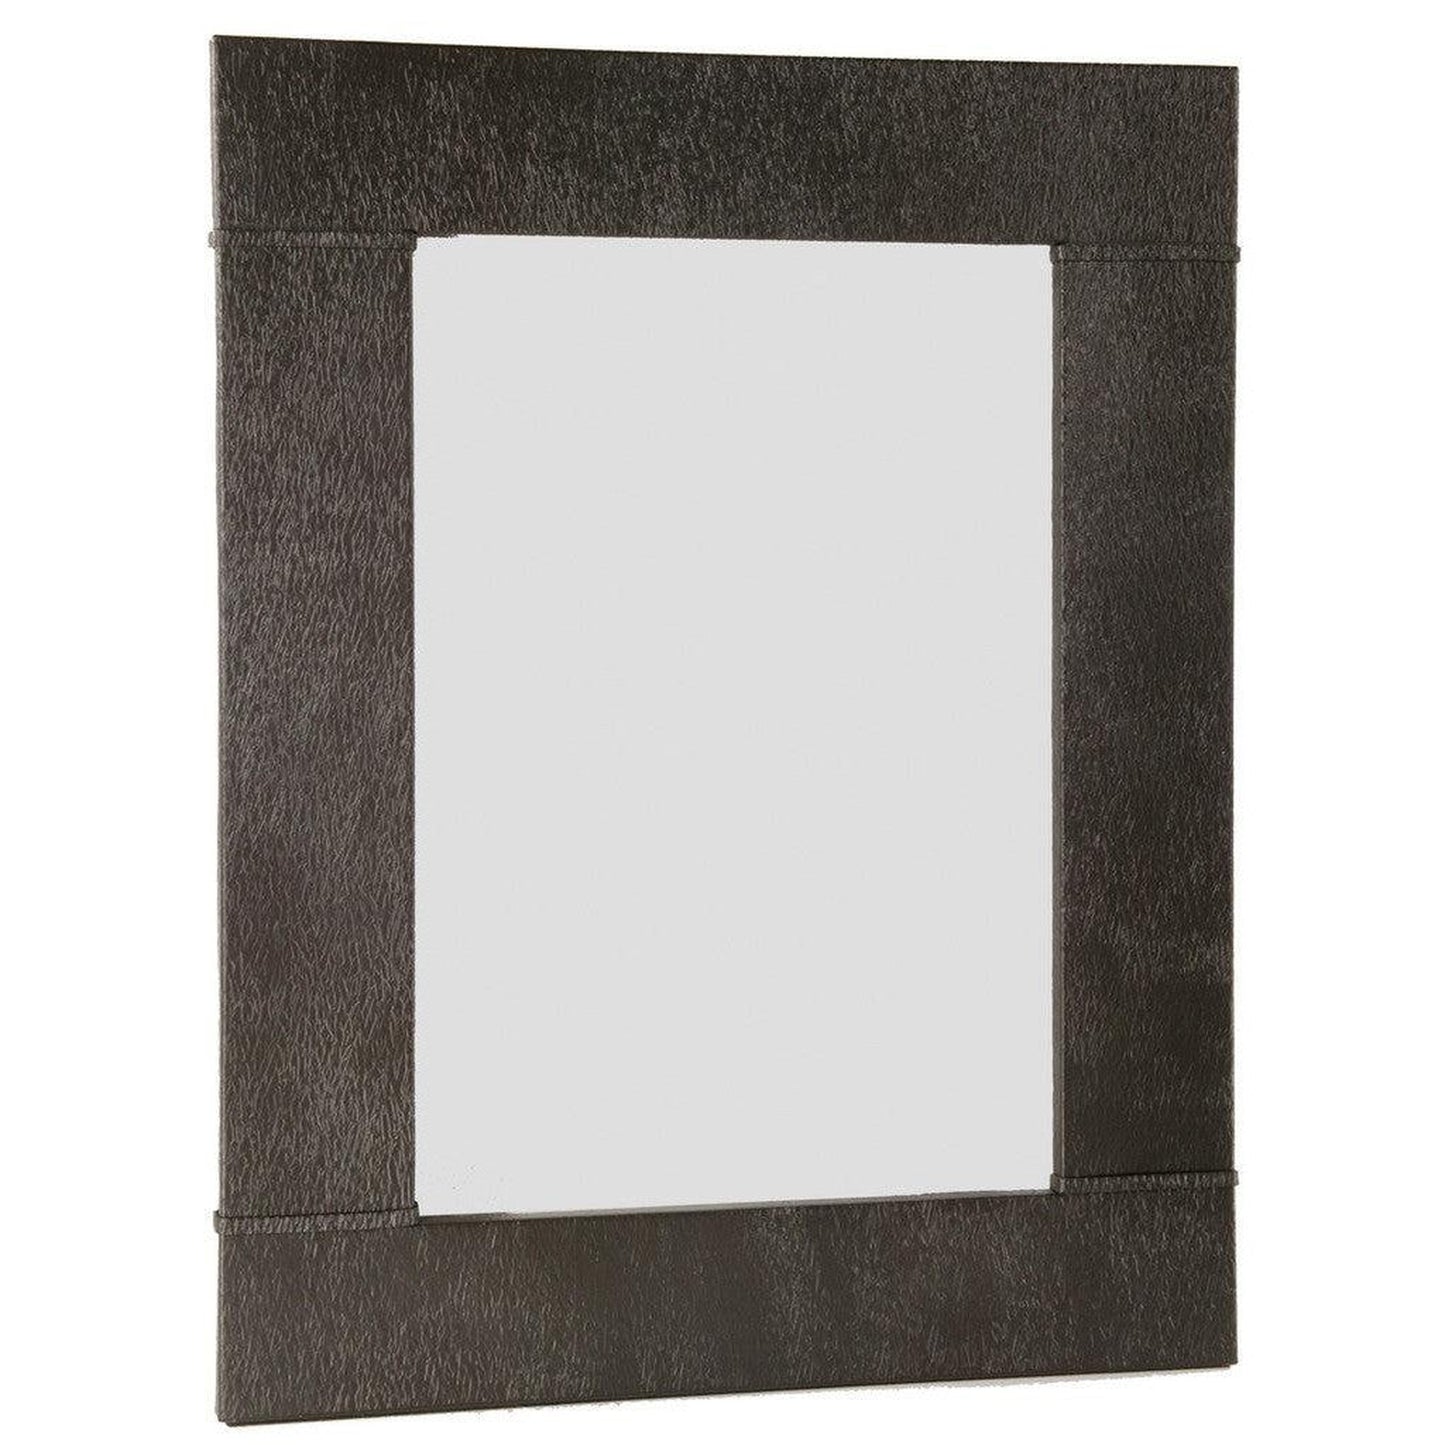 Stone County Ironworks Cedarvale 37" x 45" Large Chalk White Iron Wall Mirror With Pewter Iron Accent